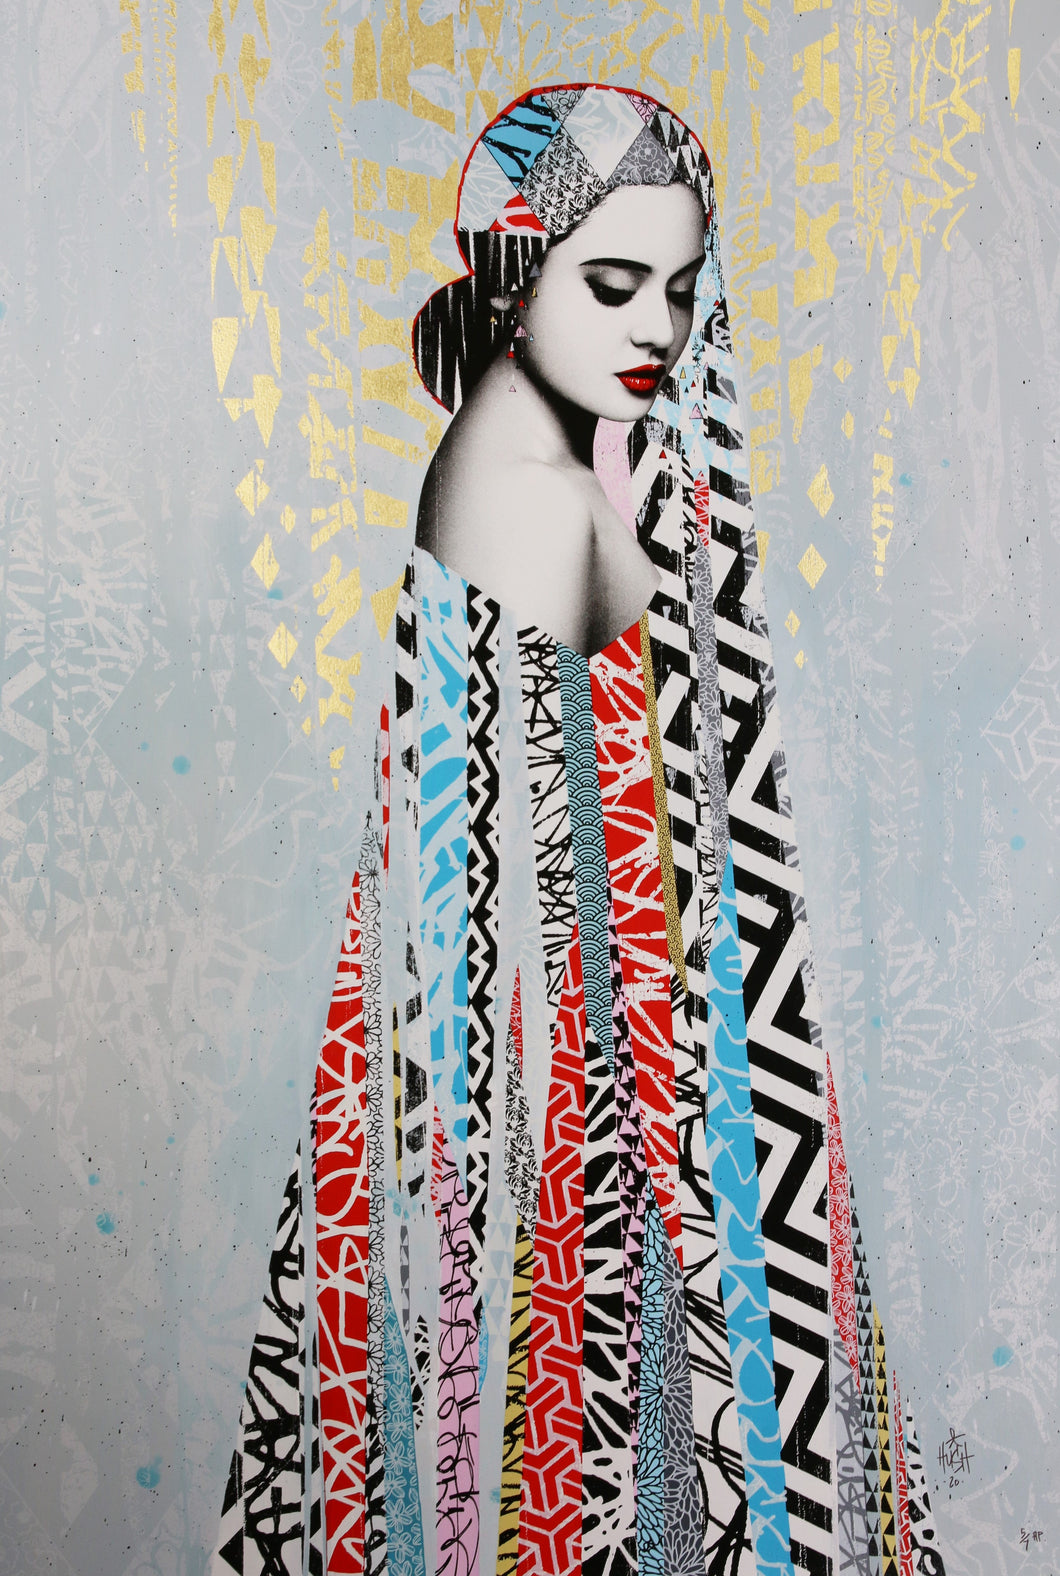 HUSH Elysian AP - signed screenprint, acrylic and with 24ct gold leaf